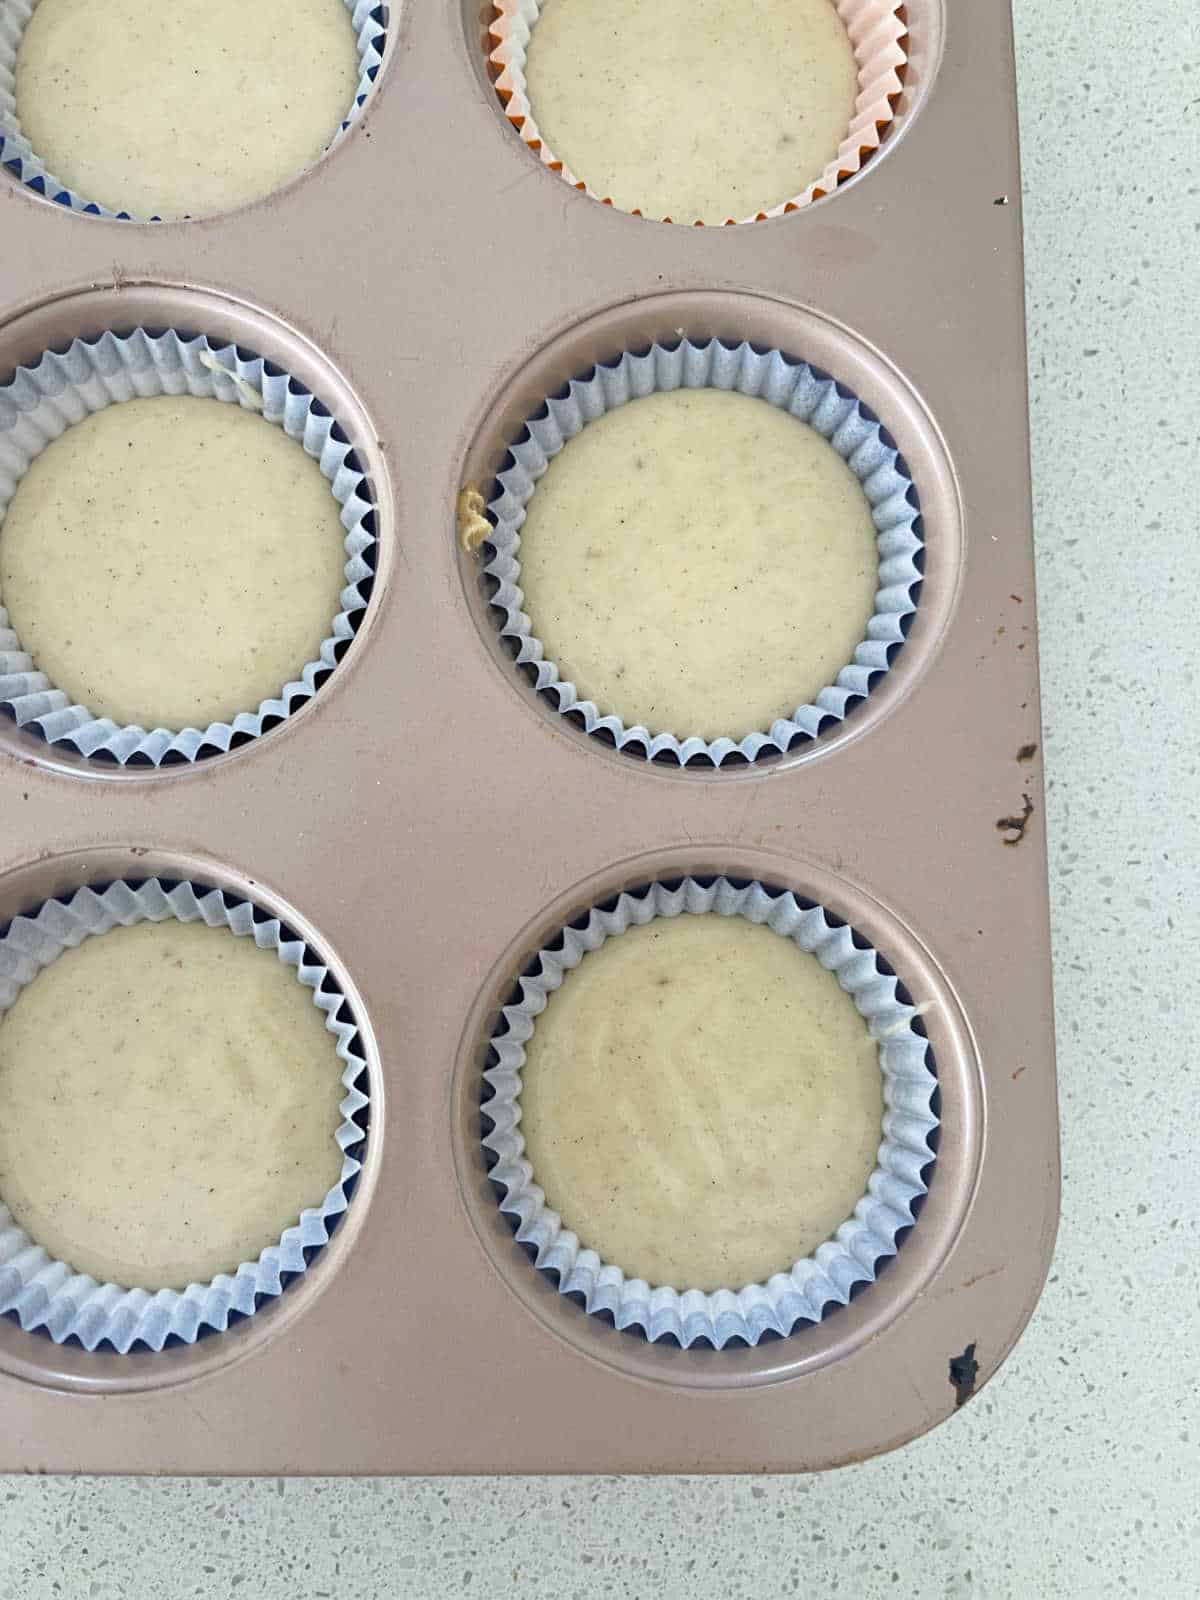 Banana muffin mixture in patty cases.